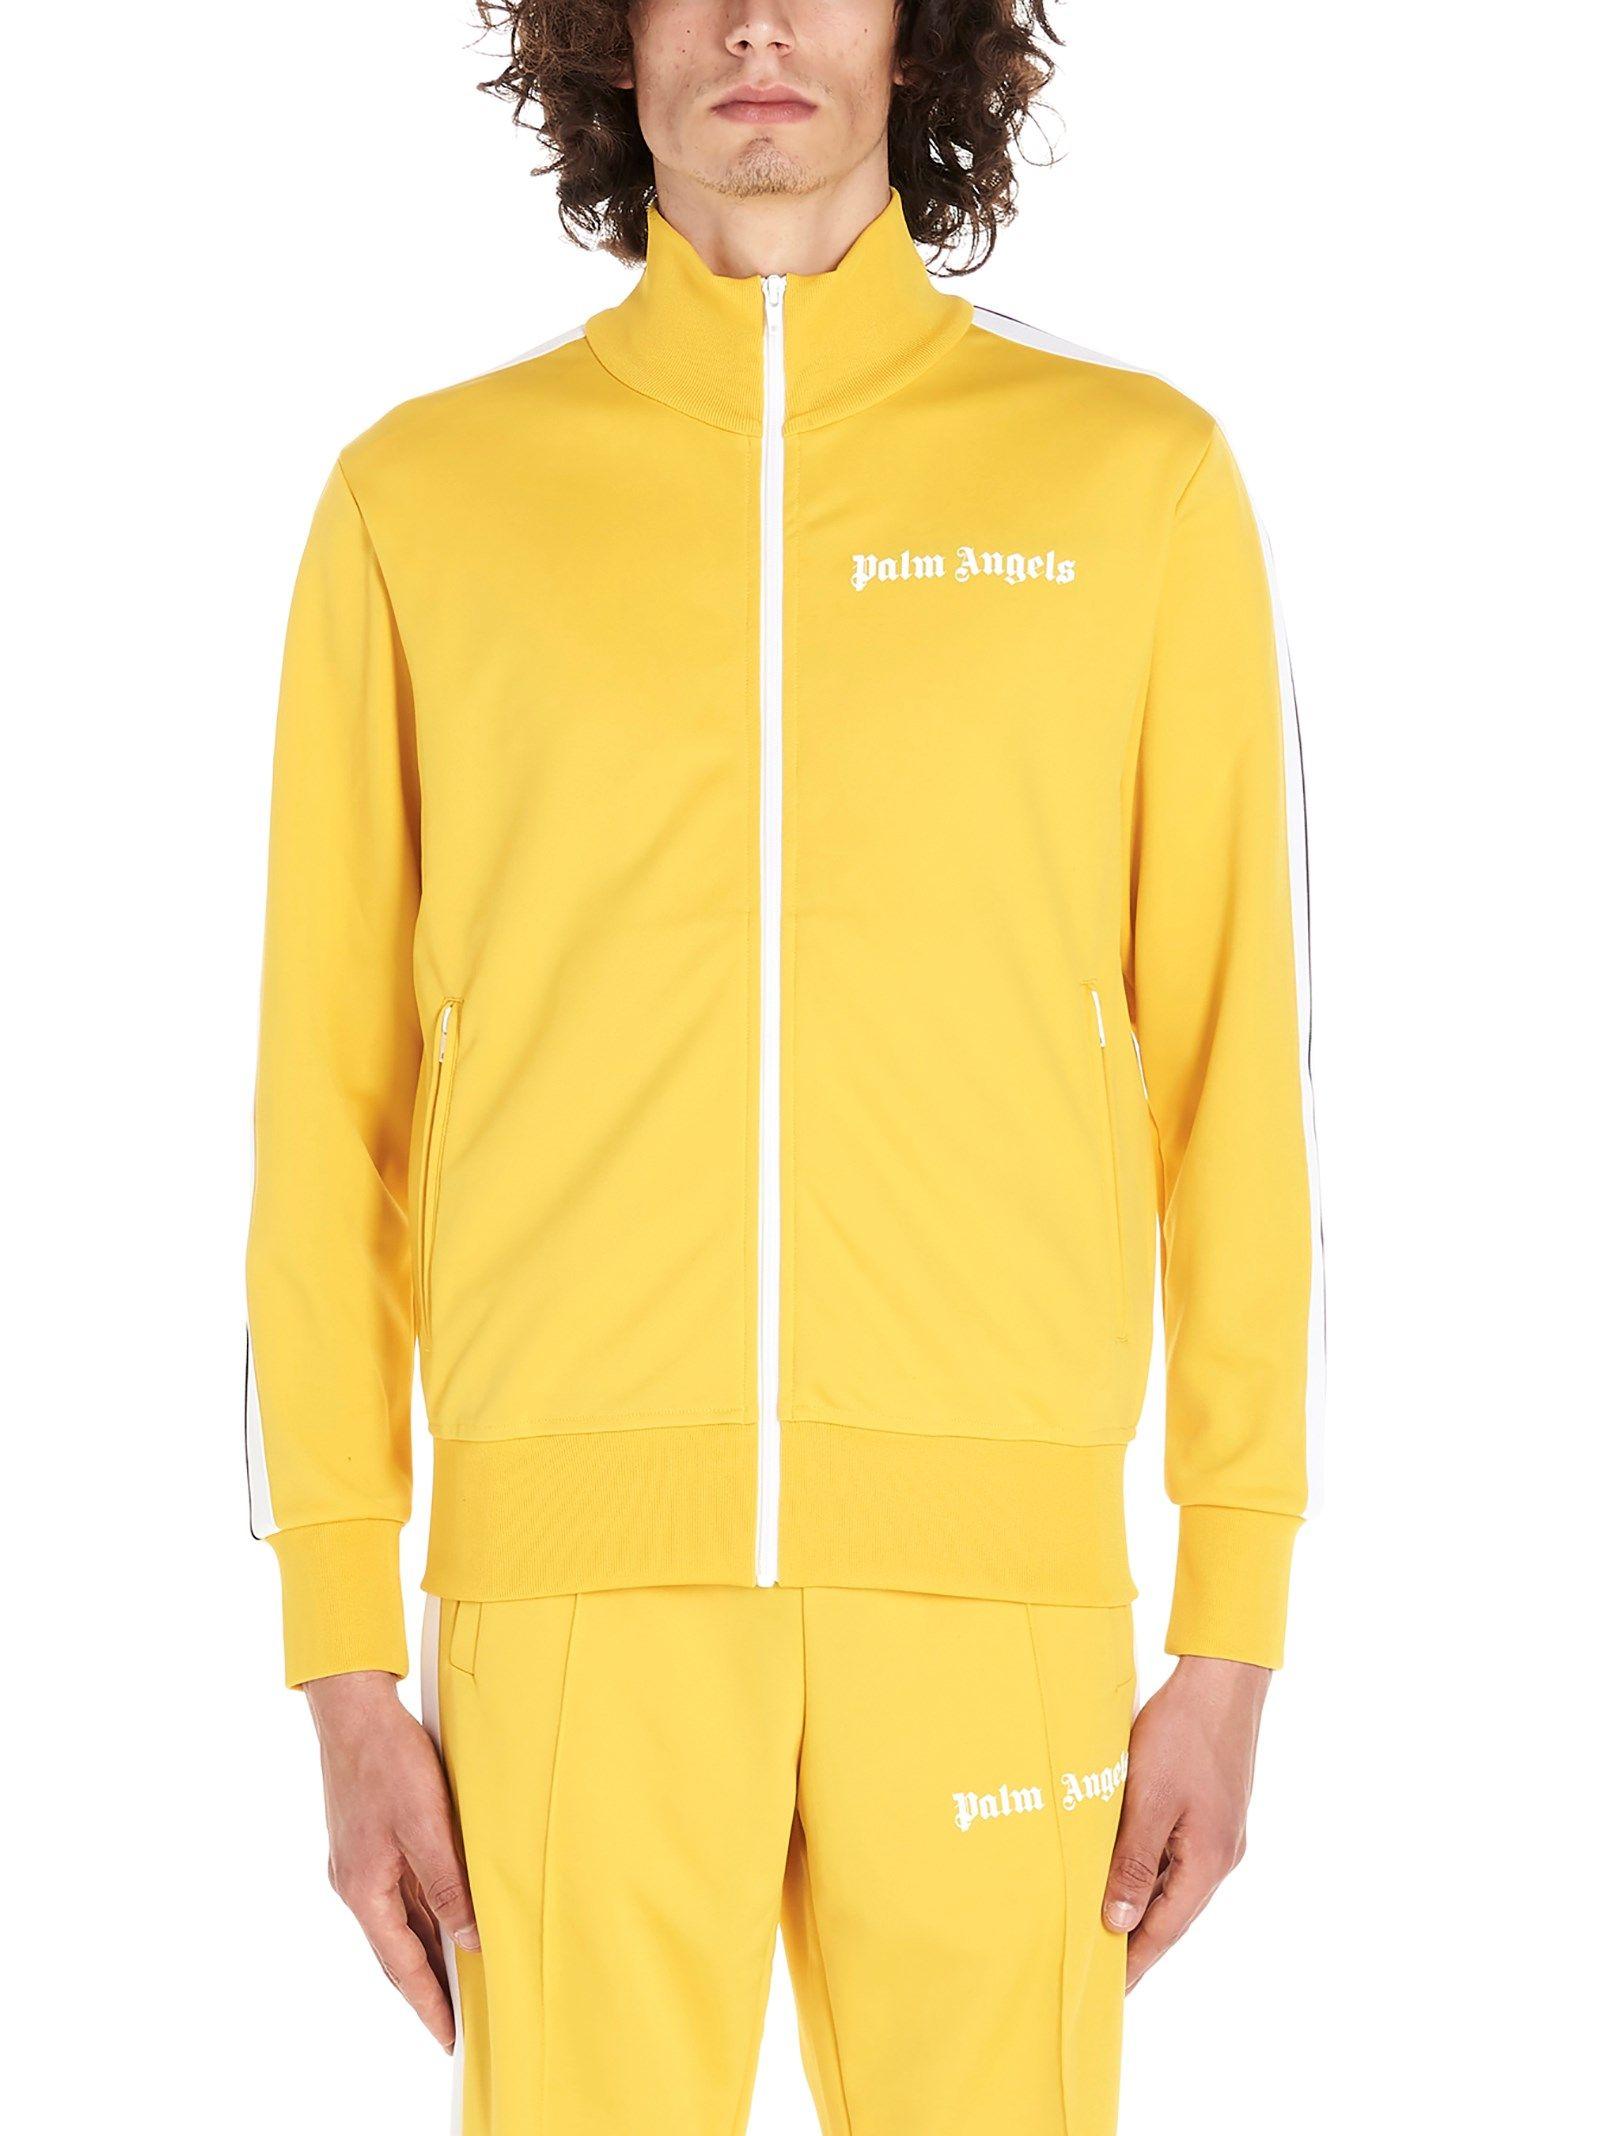 Palm Angels Synthetic Yellow Polyester Sweatshirt for Men - Lyst